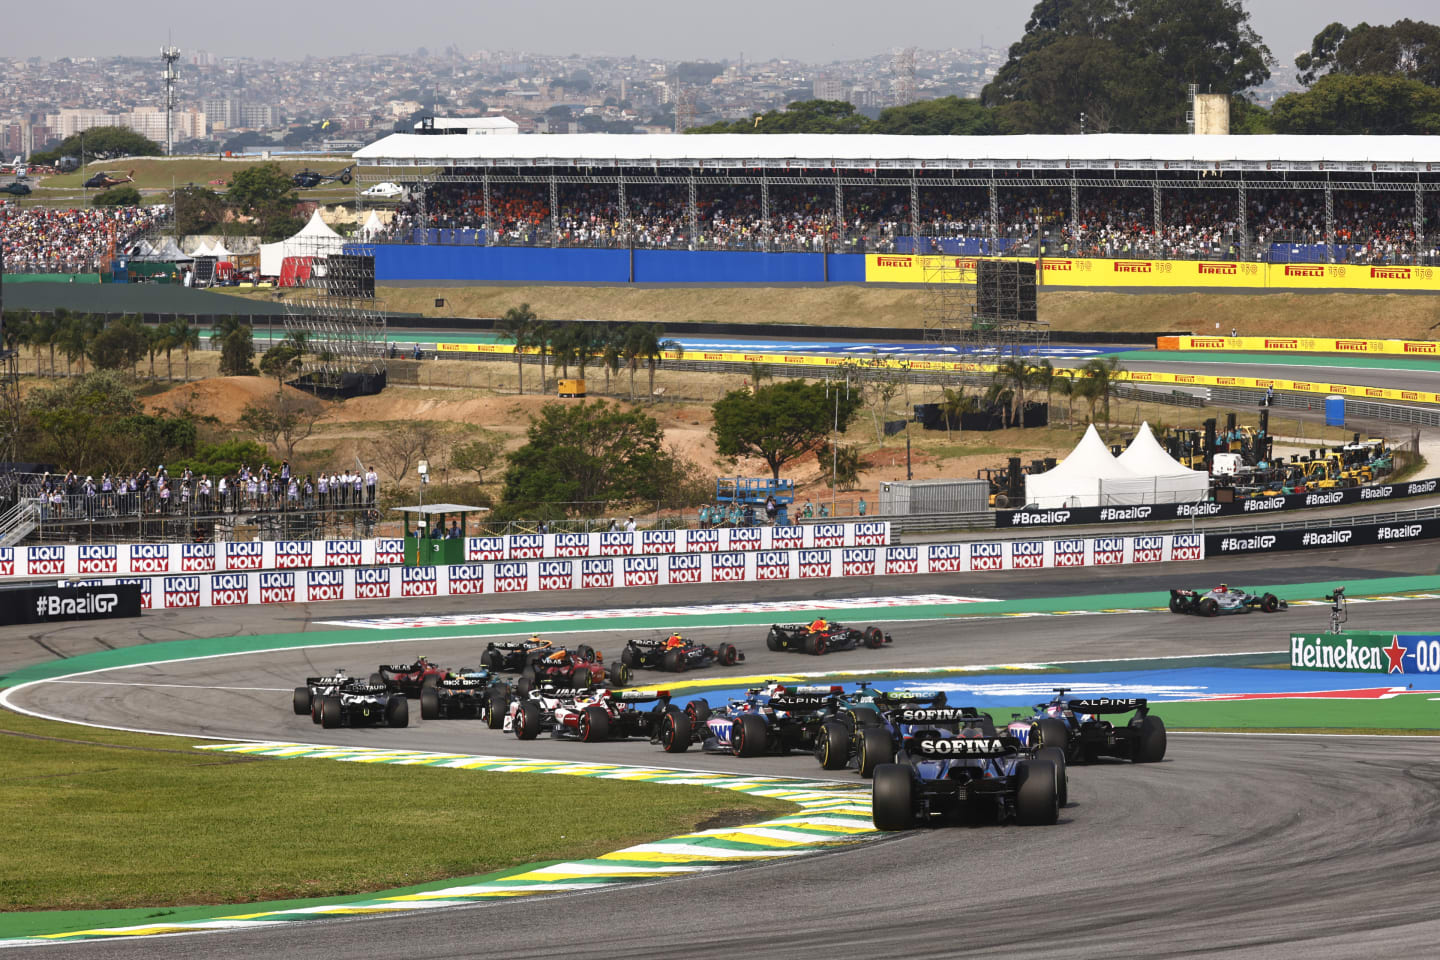 SAO PAULO, BRAZIL - NOVEMBER 13: A rear view of the start during the F1 Grand Prix of Brazil at